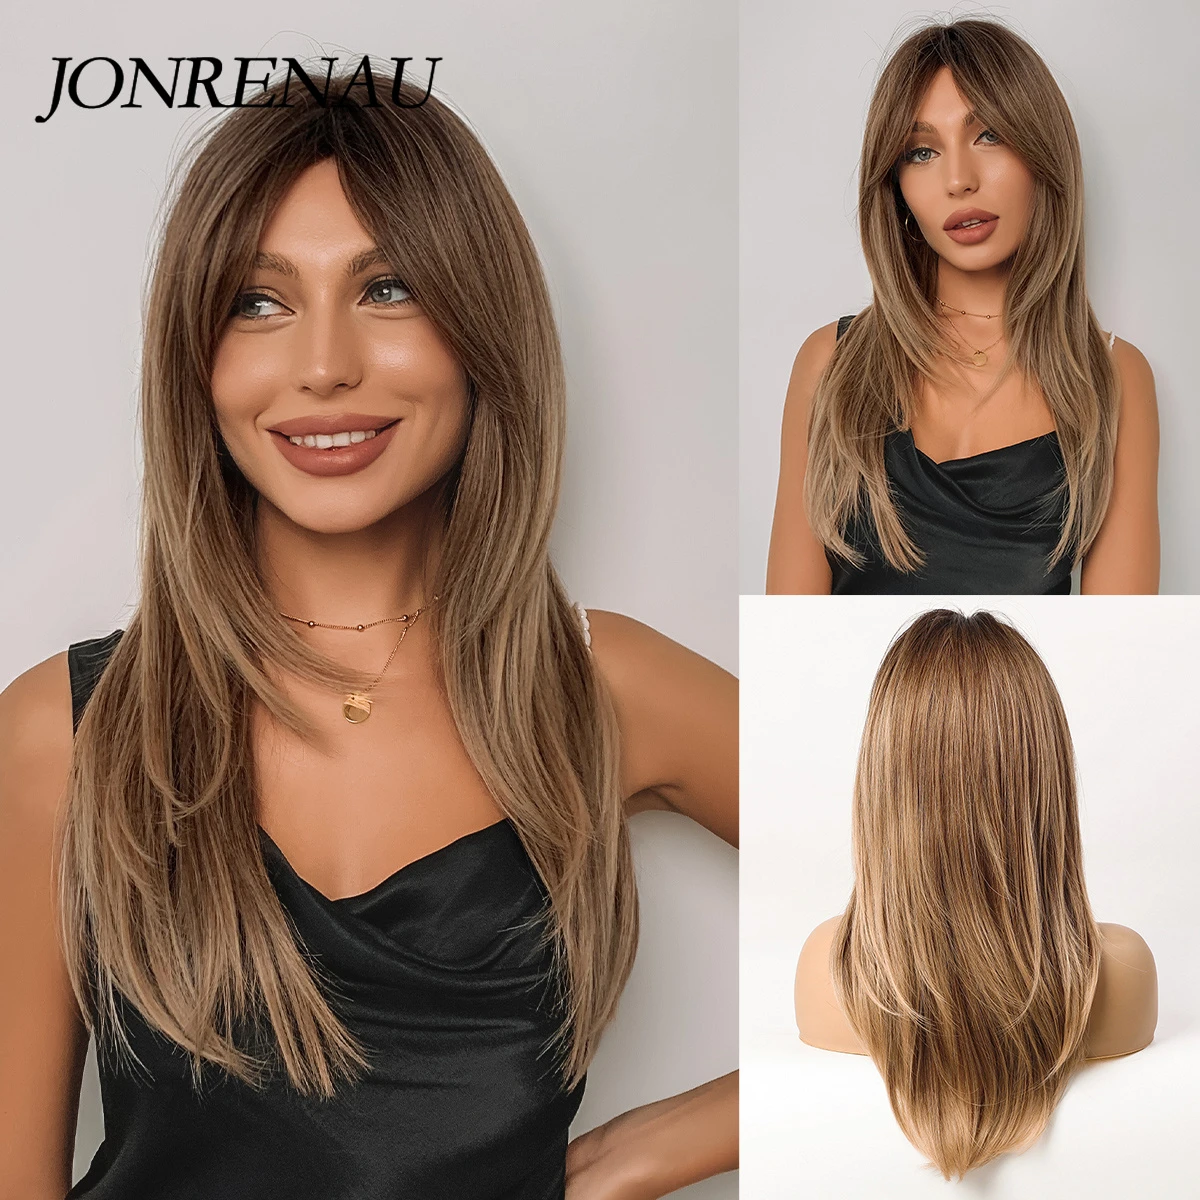 JONRENAU Long Wave Ombre Dark Black Brown Blonde Synthetic Wigs for Women Party Daily Use Cosplay Wig Natural Curly Hair